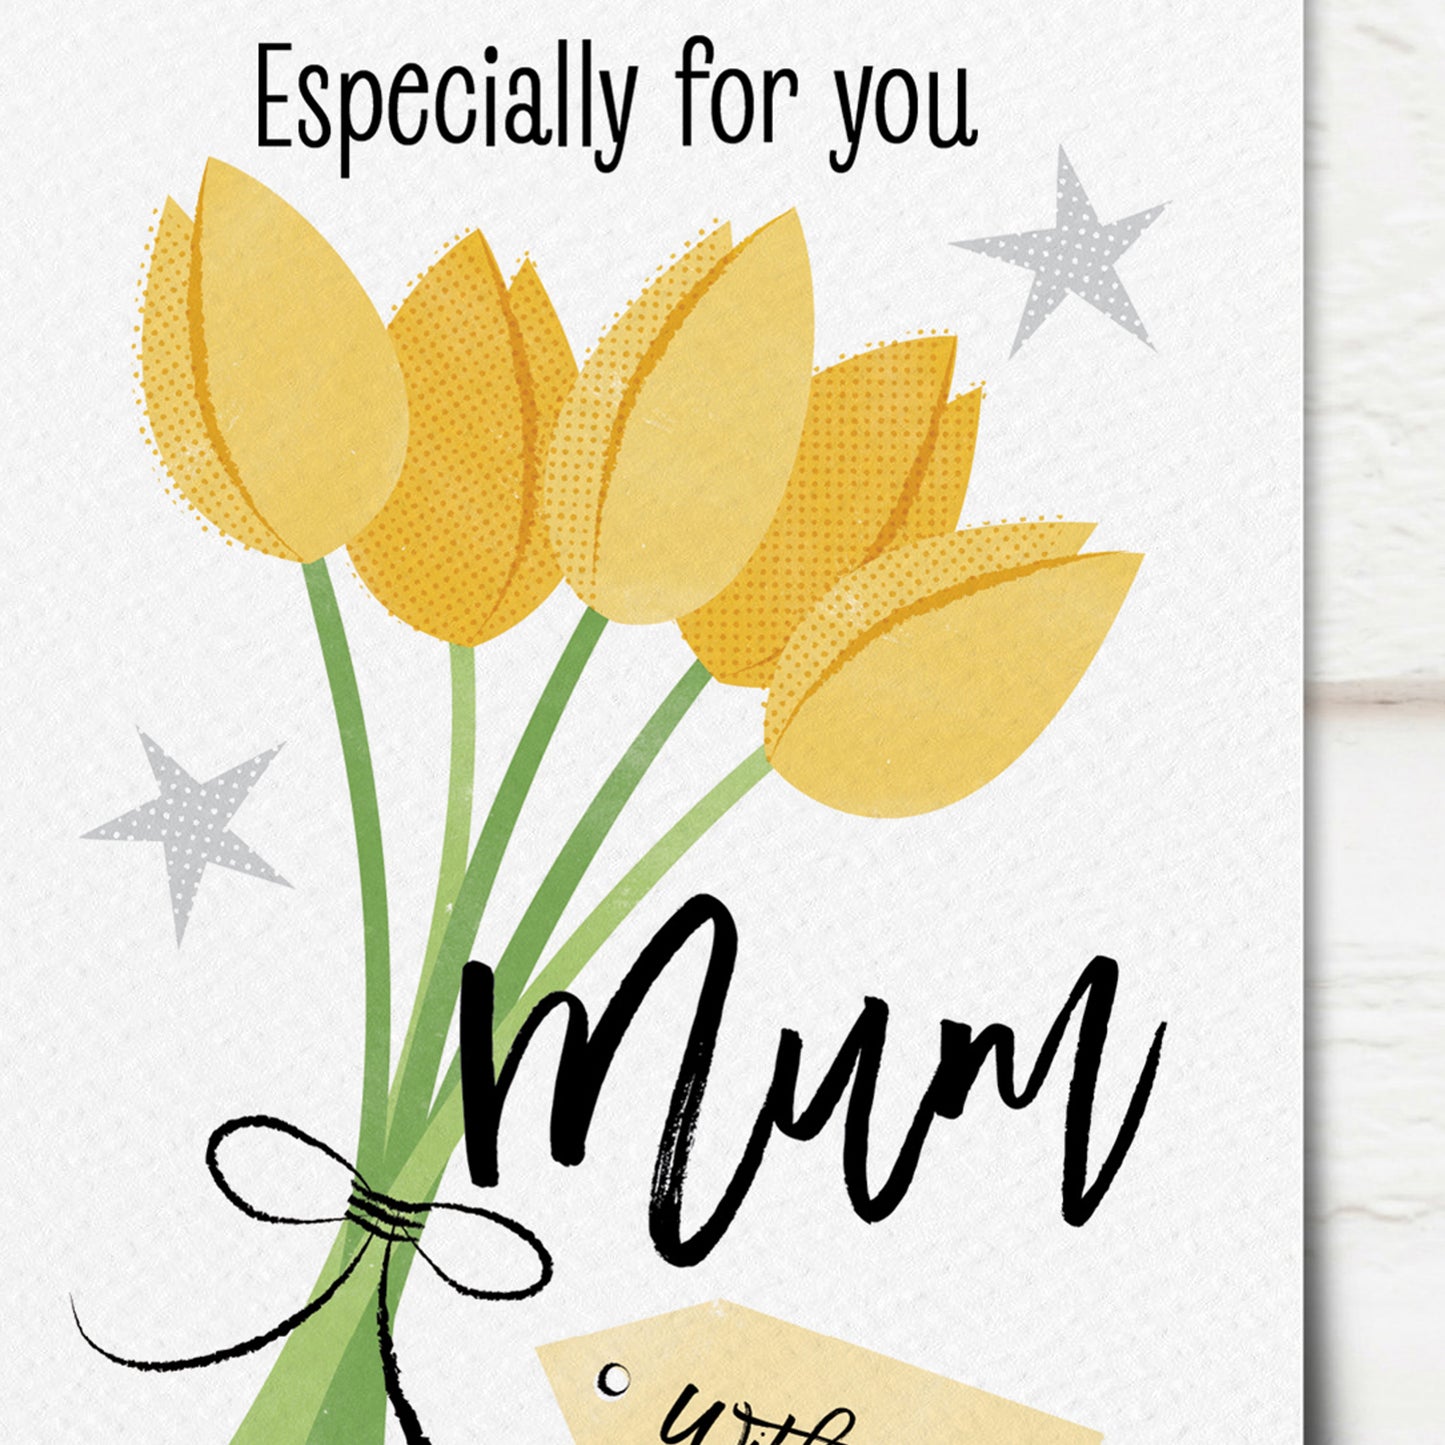 Sketchy Tulips for Mum Card, 1